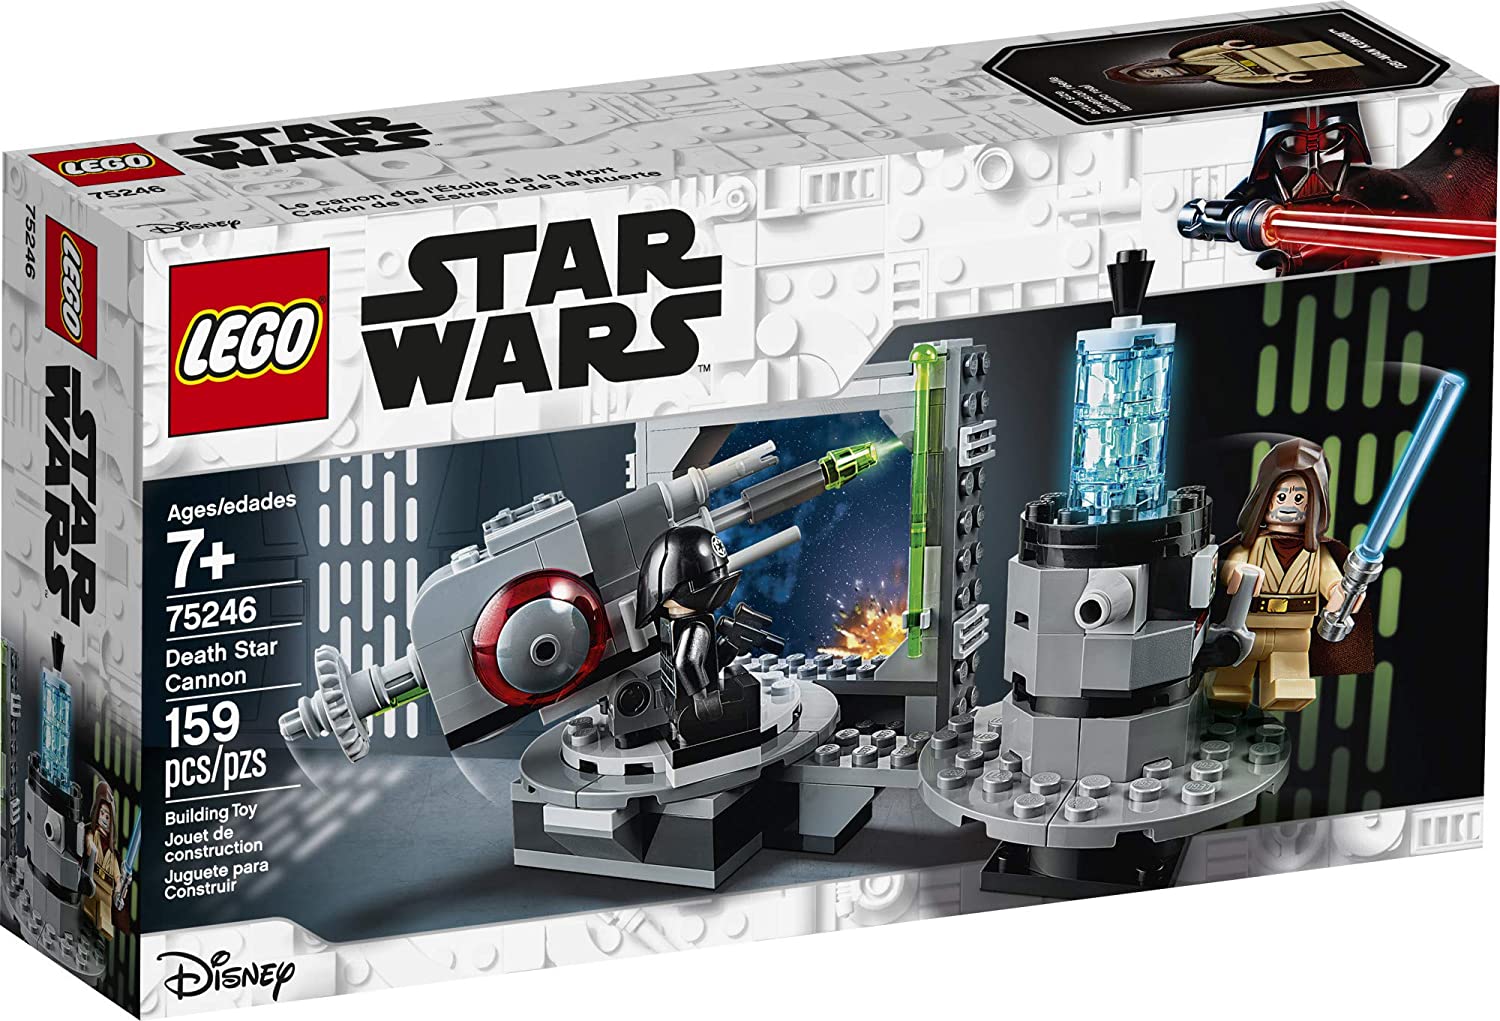 159-Piece LEGO Star Wars: A New Hope Death Star Cannon Building Set $11.99 + Free Curbside Pickup via Best Buy